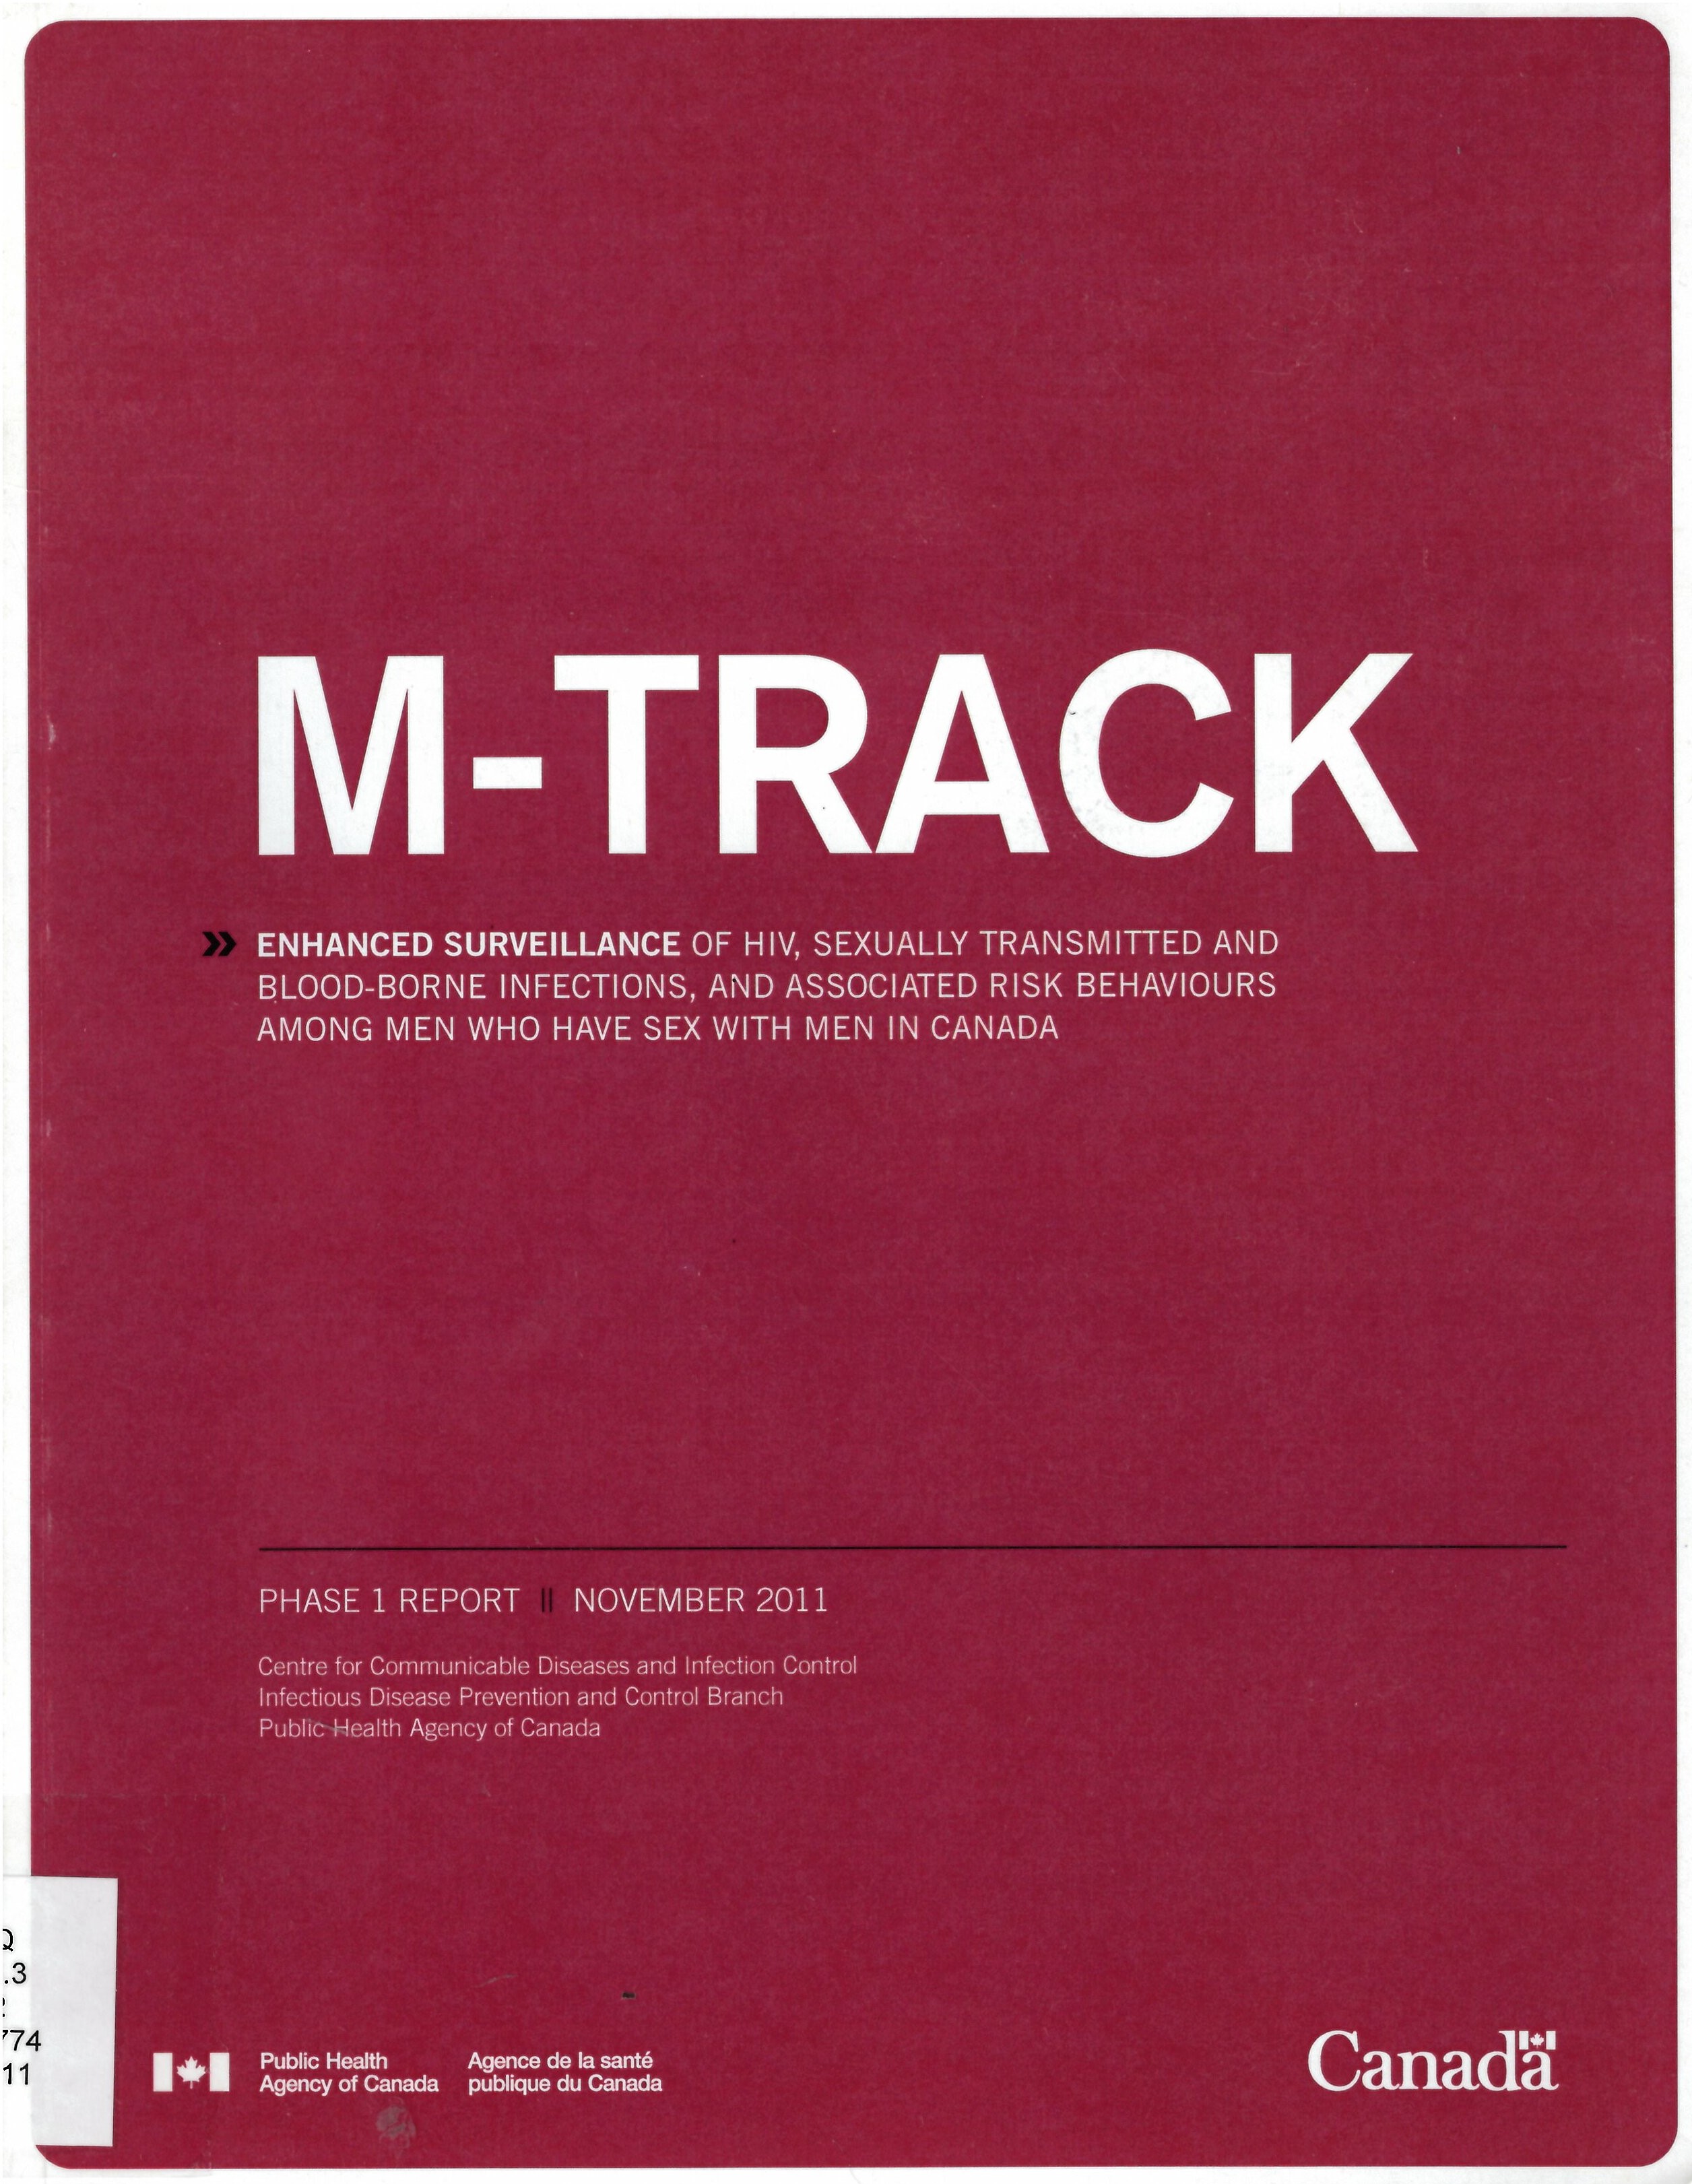 M-Track, enhanced surveillance of HIV, sexually transmitted and blood-borne infections, and associated risk behaviours among men who have sex with men in Canada : phase 1 report